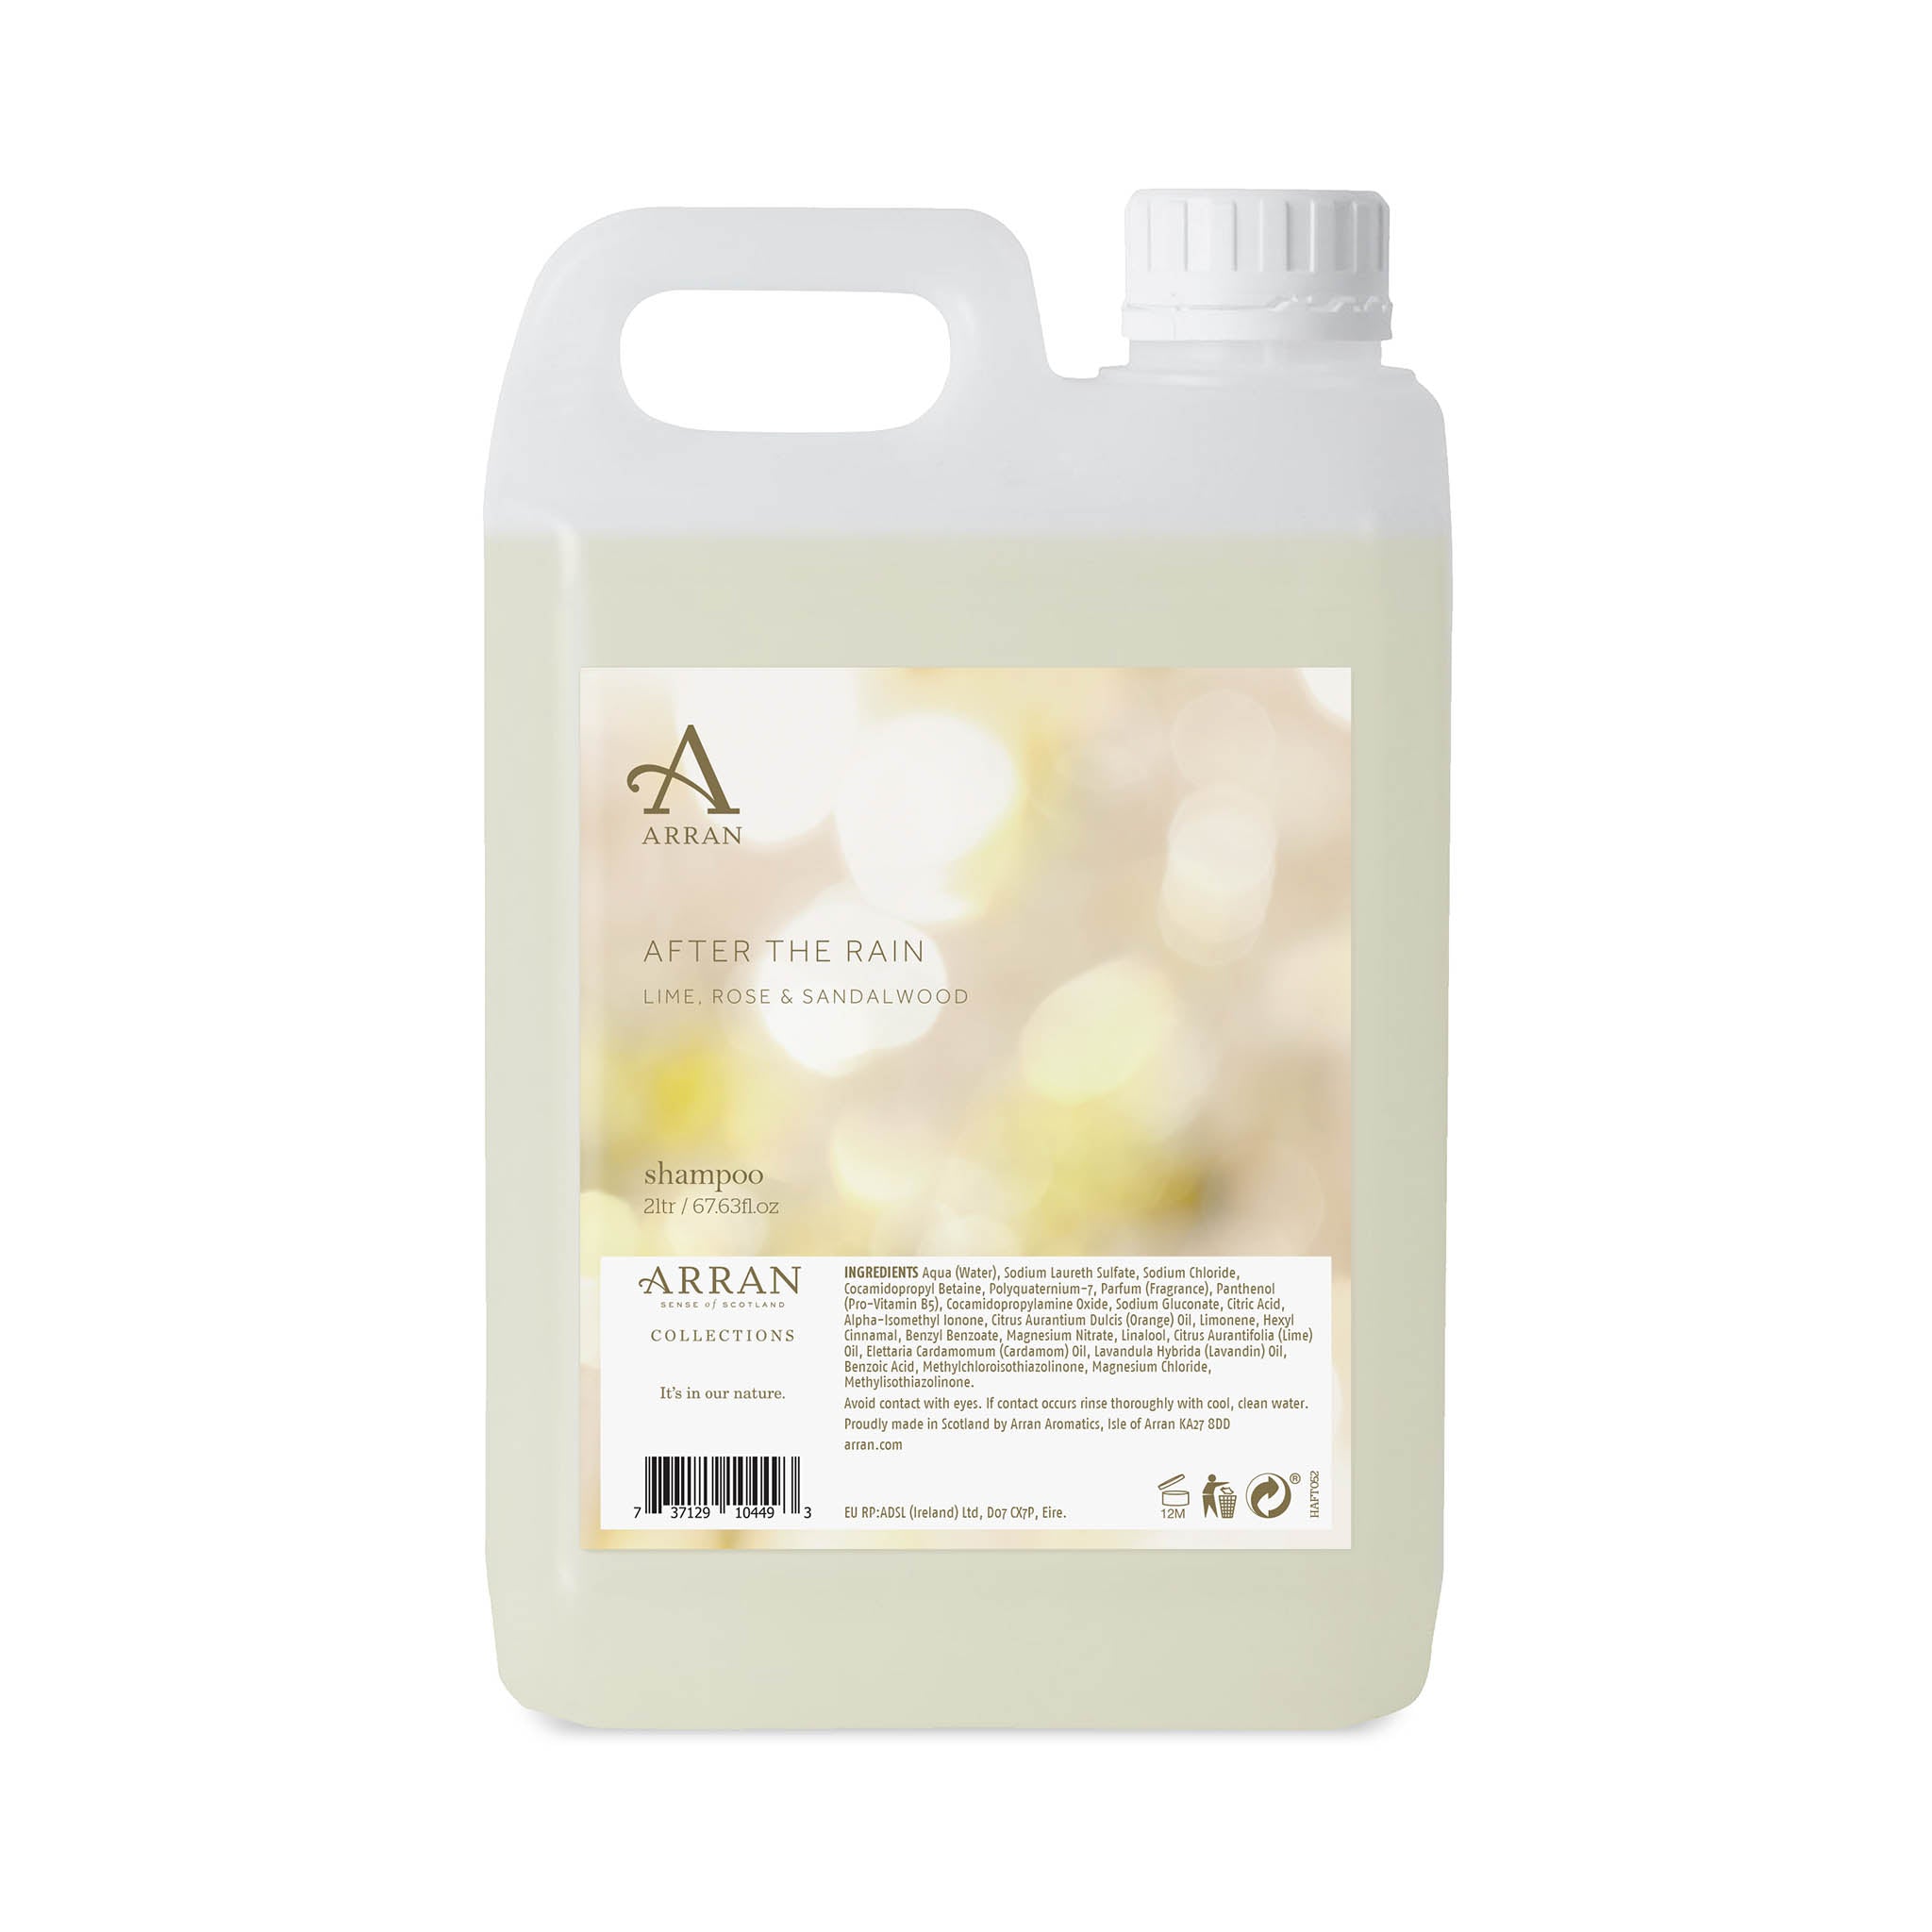 An image of ARRAN 2L After the Rain Shampoo Refill | Made in Scotland | Lime, Rose & Sandalw...